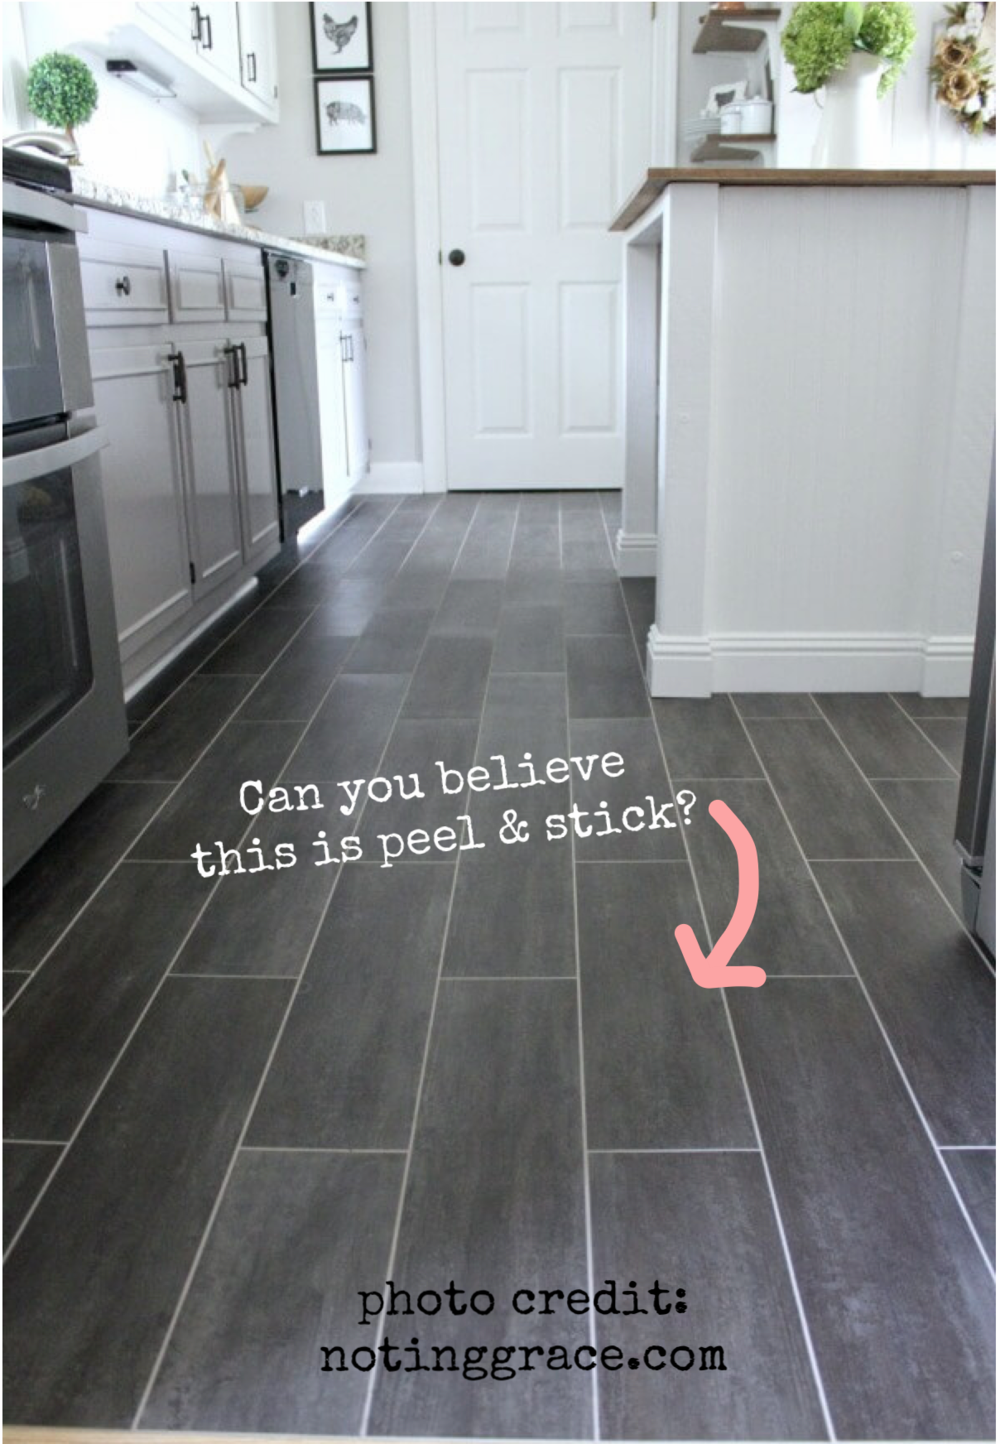 Ideas For Covering Up Tile Floors, Can You Install Vinyl Flooring Over Tile